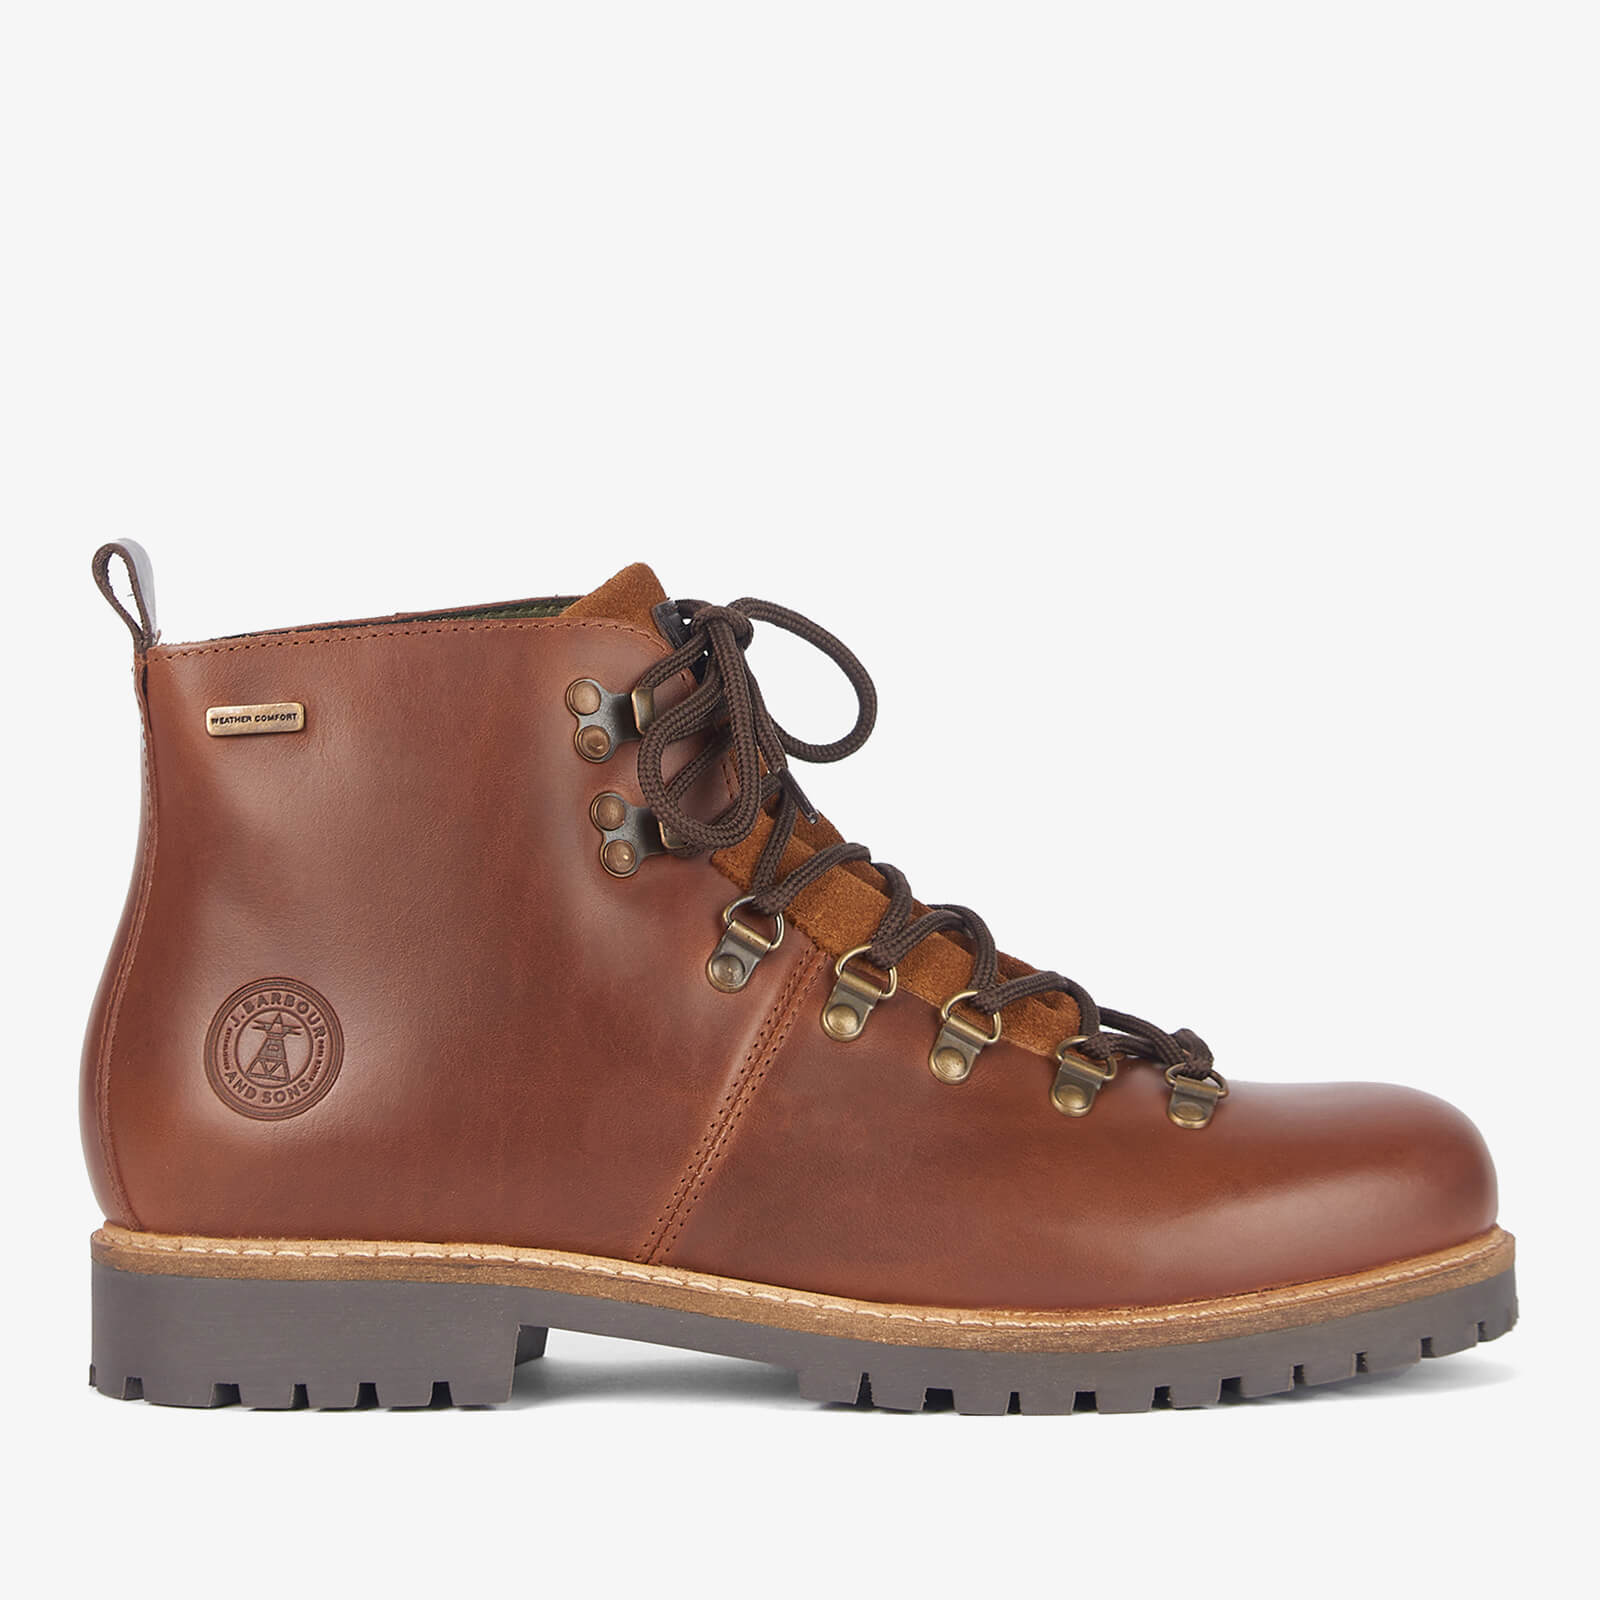 Barbour Men’s Wainwright Leather Hiking-Style Boots